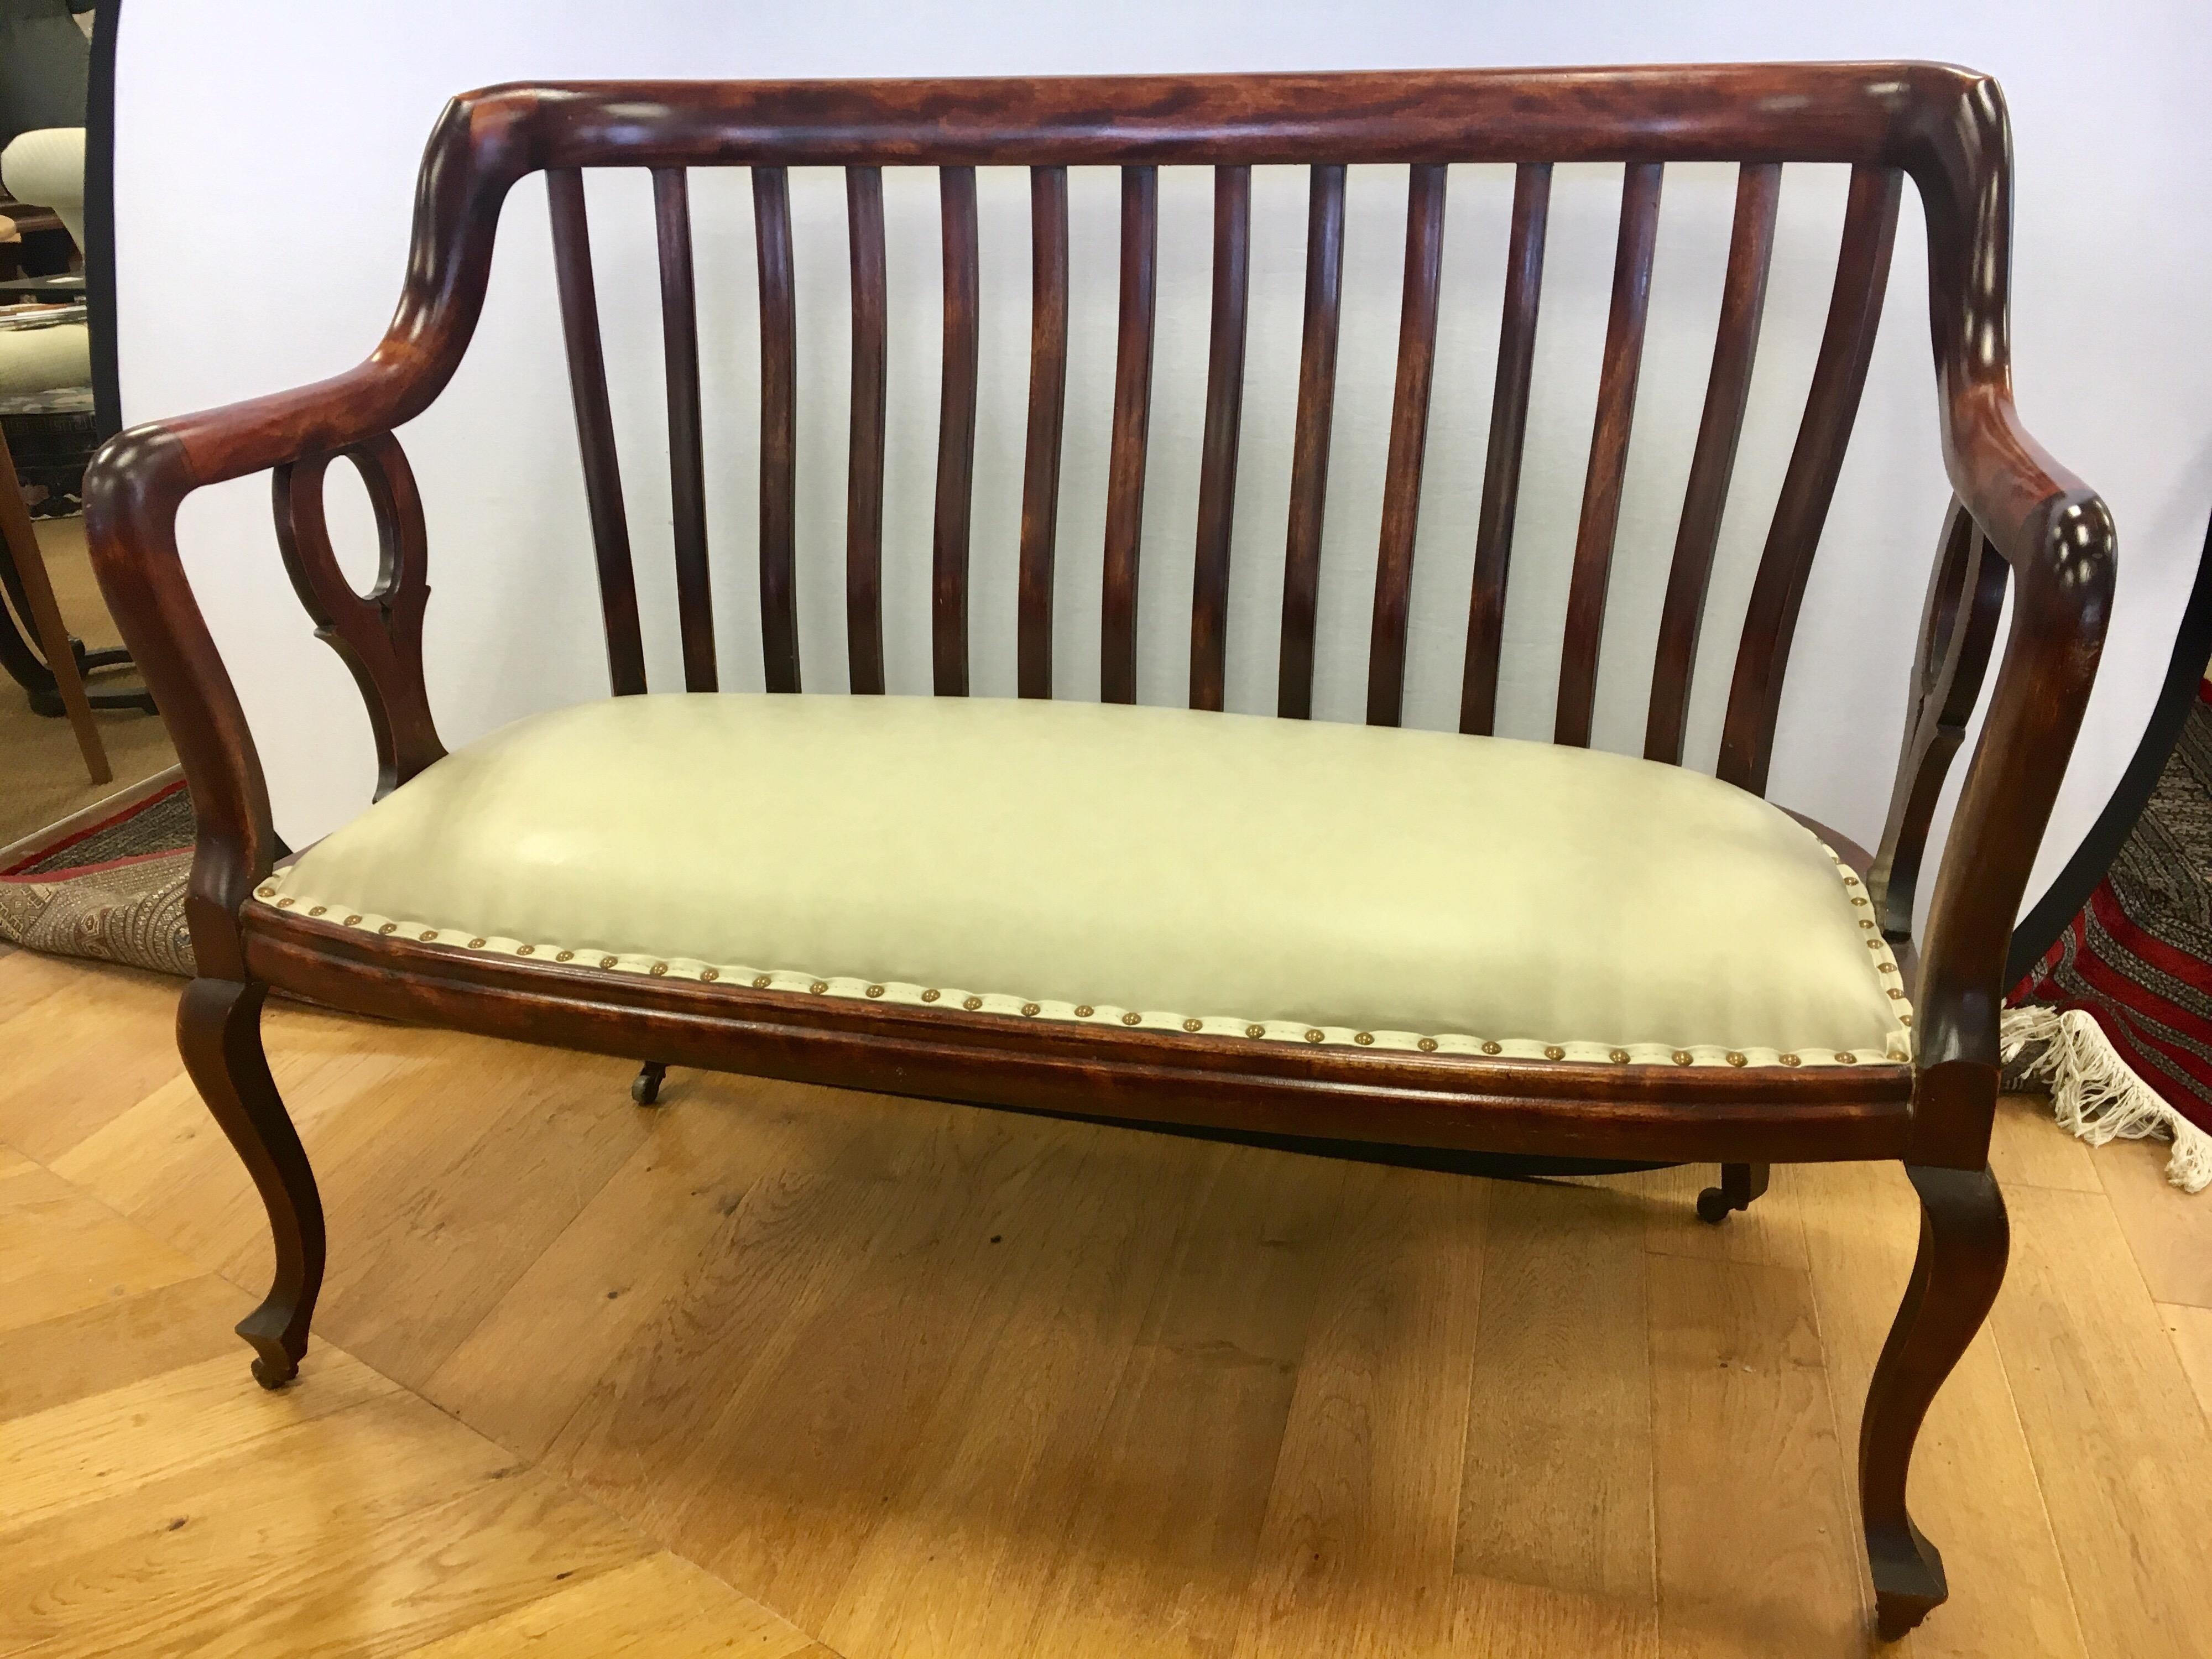 Elegant antique English mahogany settee on casters and featuring brand new leather-like upholstery and
fill for seat cushion and nailheads throughout. The nicest settee online today, in our humble opinion!